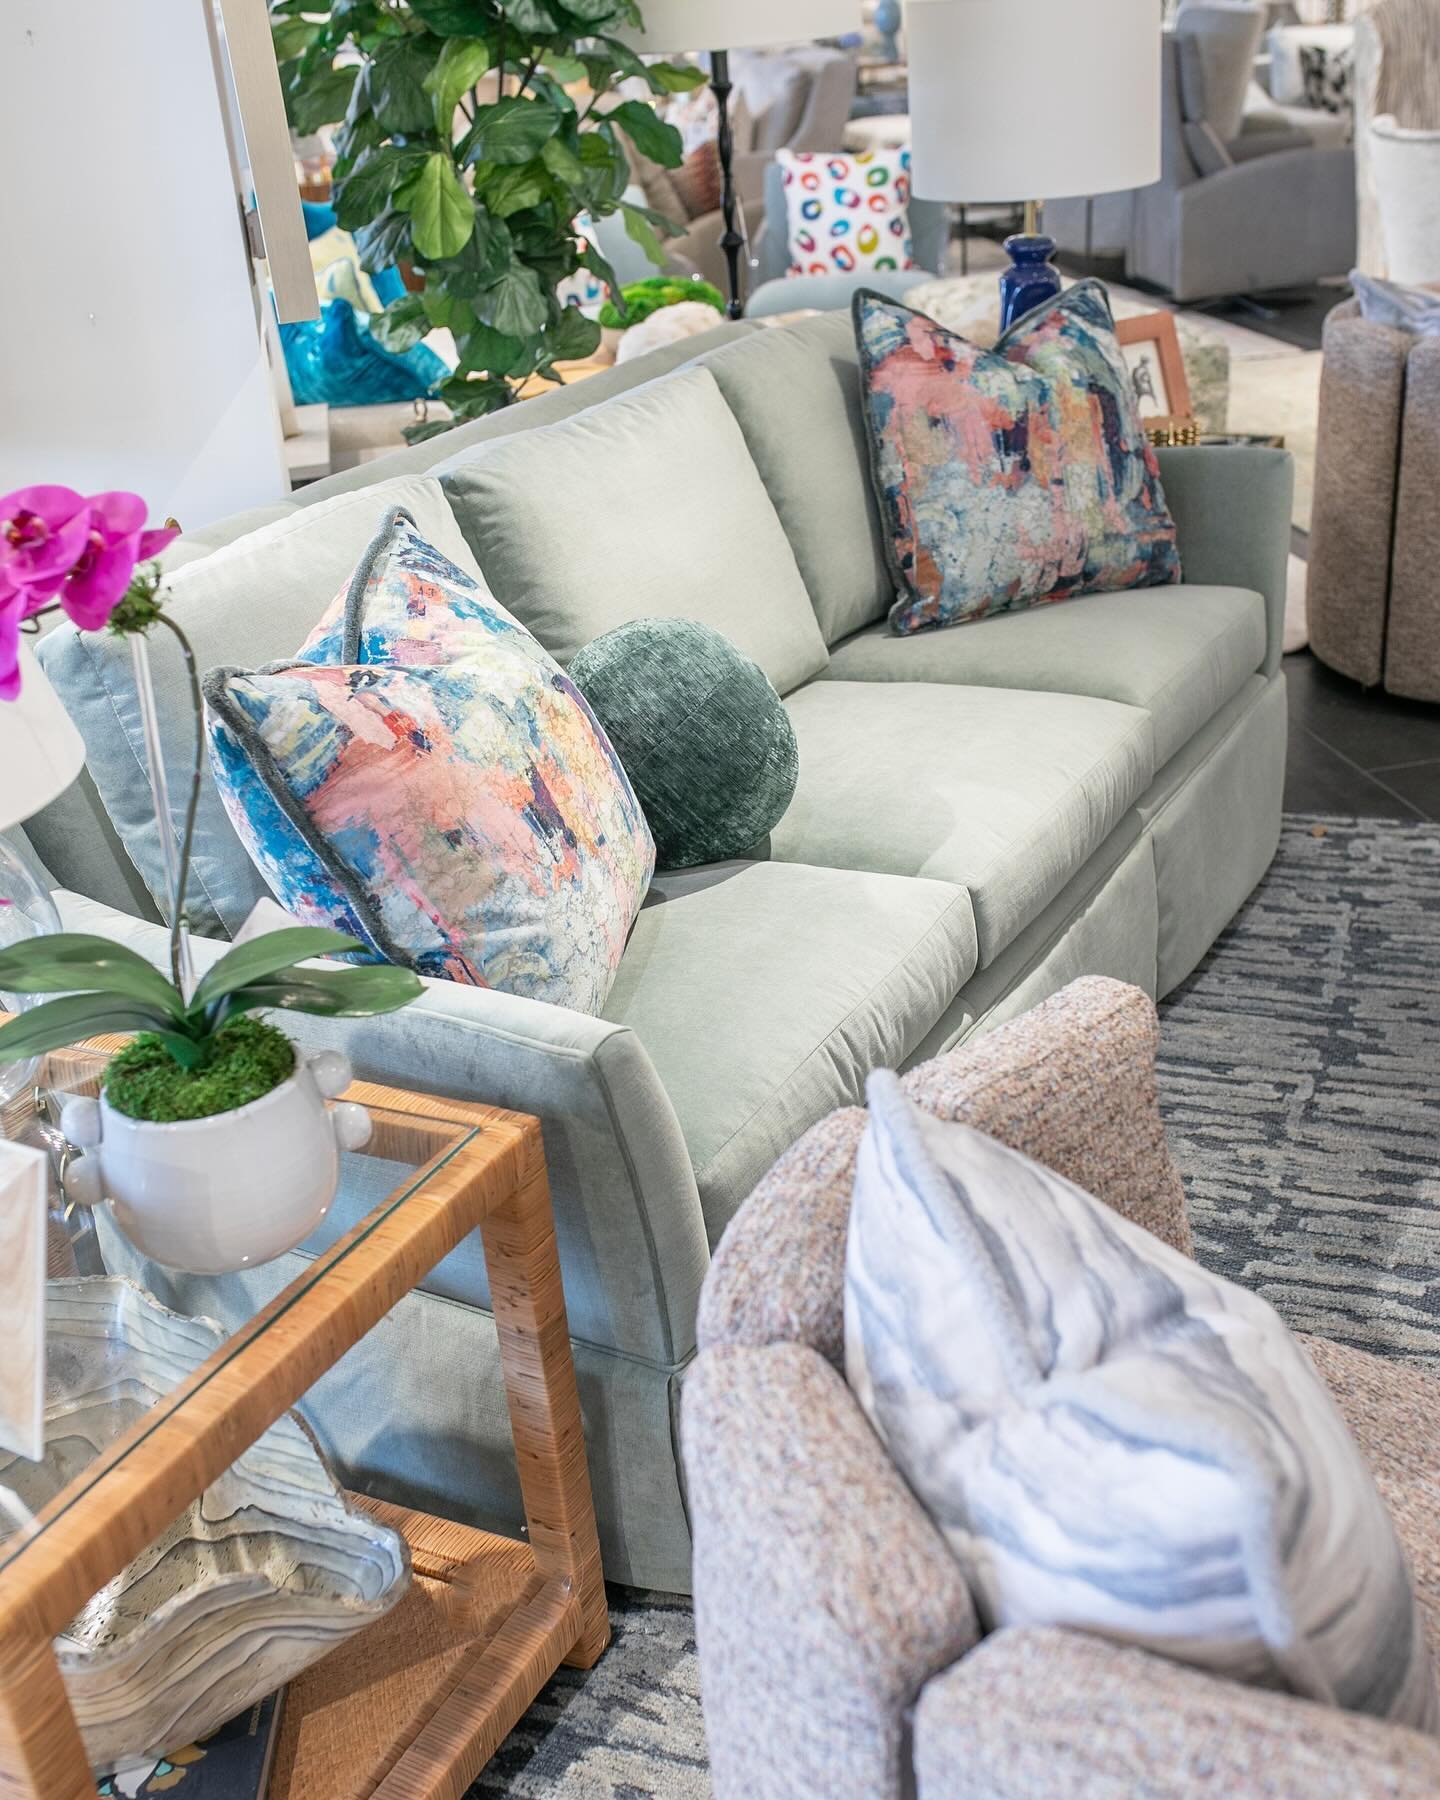 Soothing greens were all over @hpmkt this spring! A vibrant work of art and coordinating throw pillows full of saturated hues ignite the subtle shade of the sofa and bring it to life✨ Is this a trend you&rsquo;ll hop on? 

🚚 We deliver to the OKC me